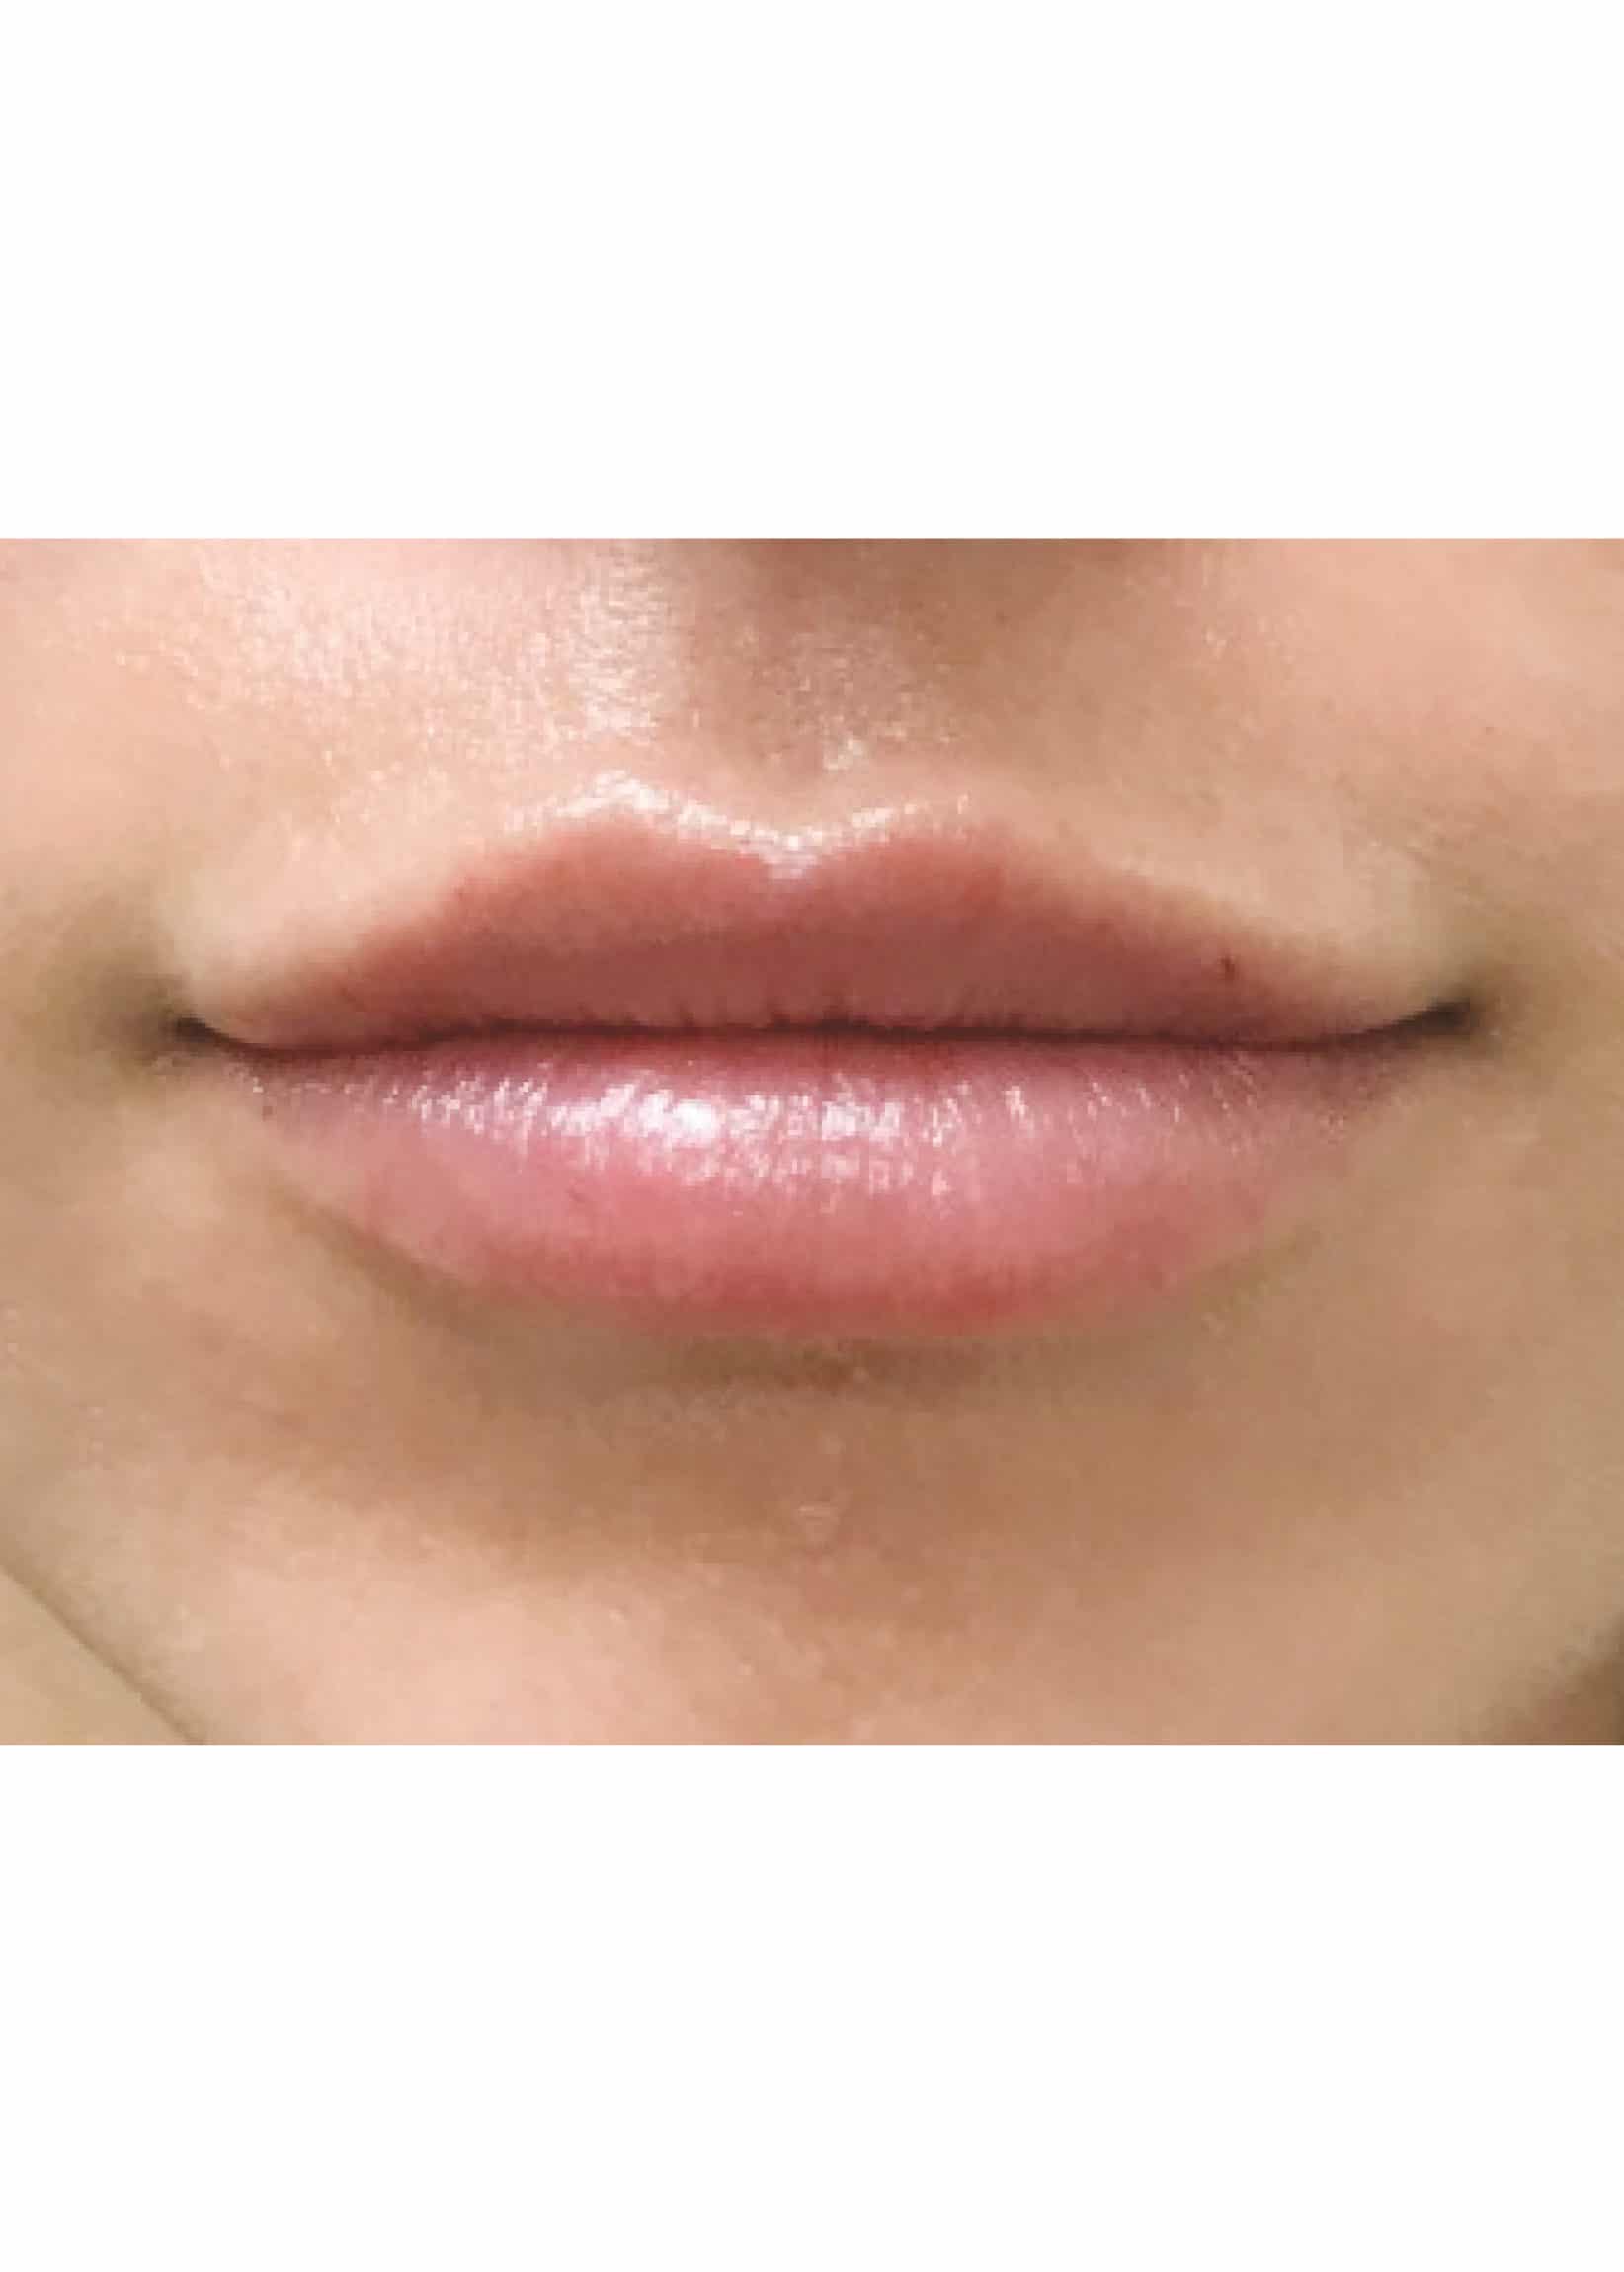 TheSkinCenter ProviderPages TiffaneyBeddow LipFiller After 6 scaled 1